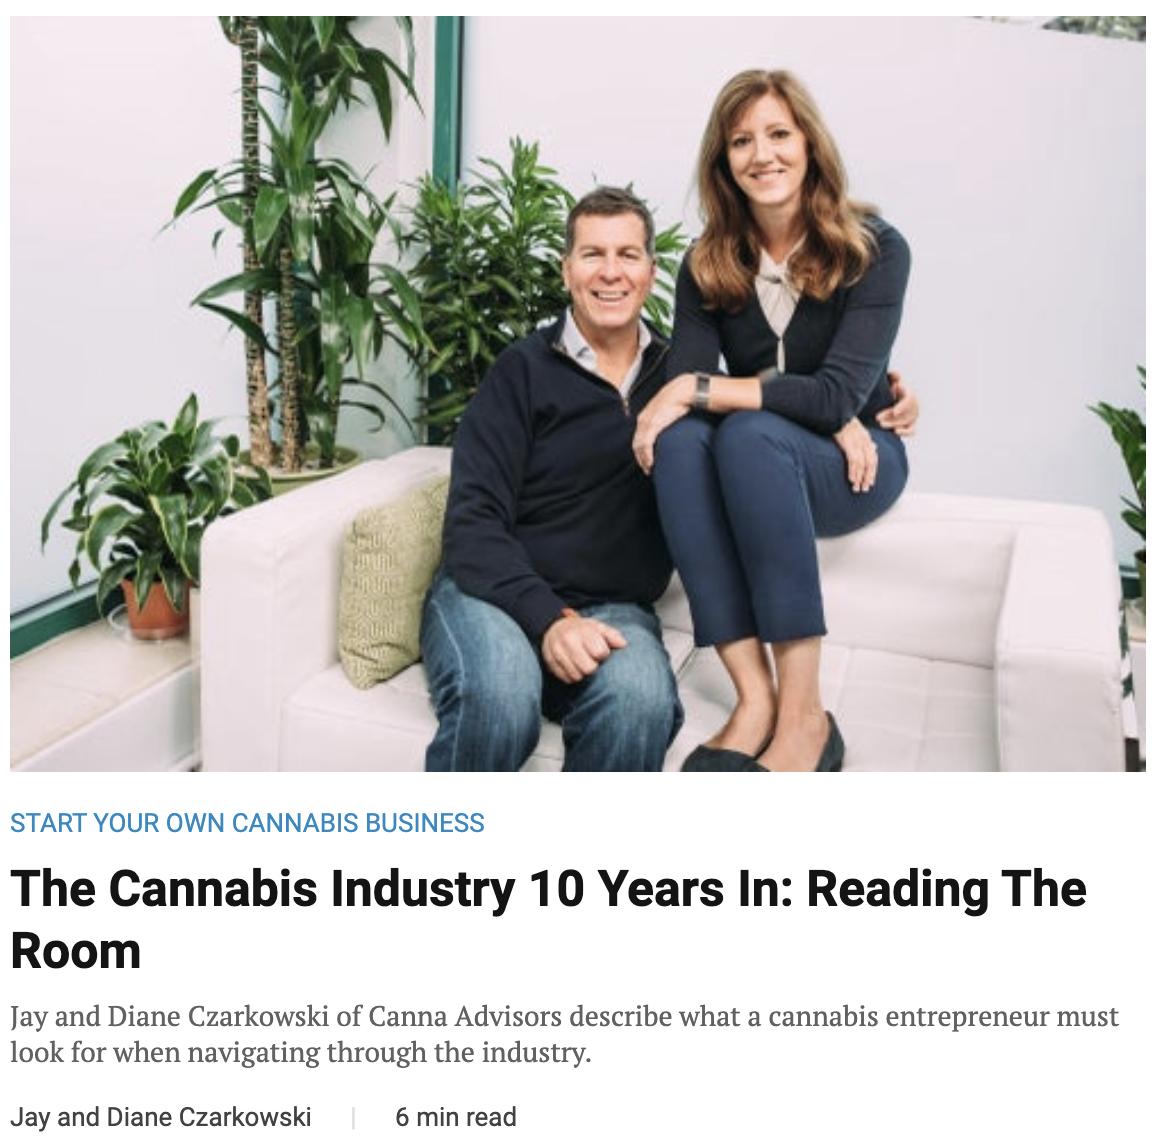 Jay and Diane Czarkowski of @cannaadvisors are true cannabis industry pioneers. So when they deliver advice gleaned from TEN YEARS of work in the industry, that's a must-read. Check out this great piece in @Entrepreneur. 

greenentrepreneur.com/article/339496